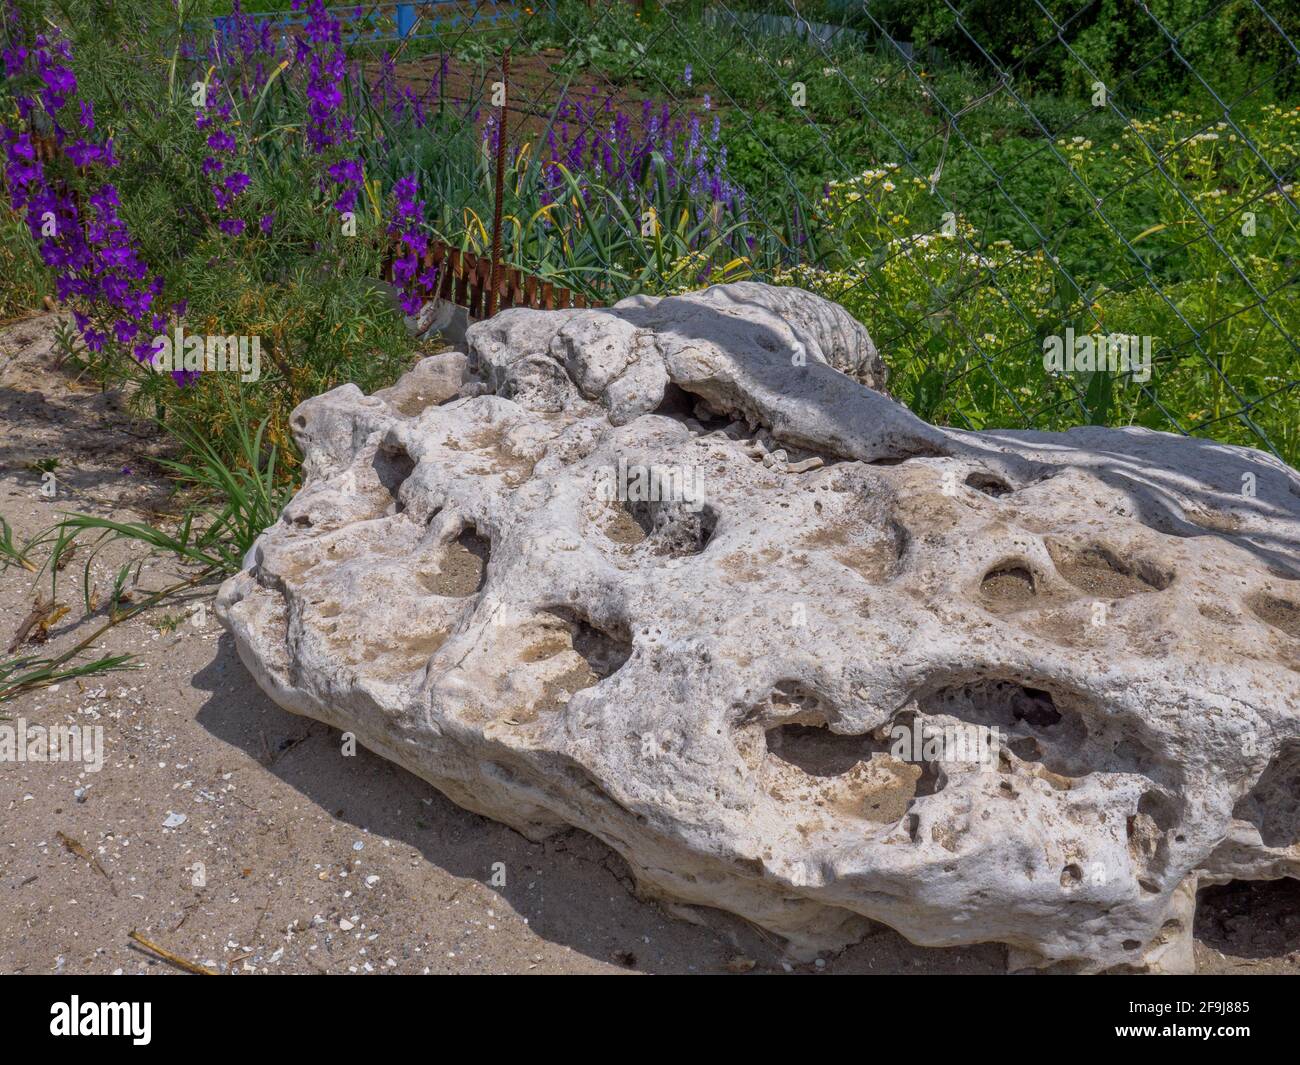 Huge porous rock with big holes on a sand in front of a mesh fence and green kitchen garden. Delphinium flowers growing nearby. Stock Photo